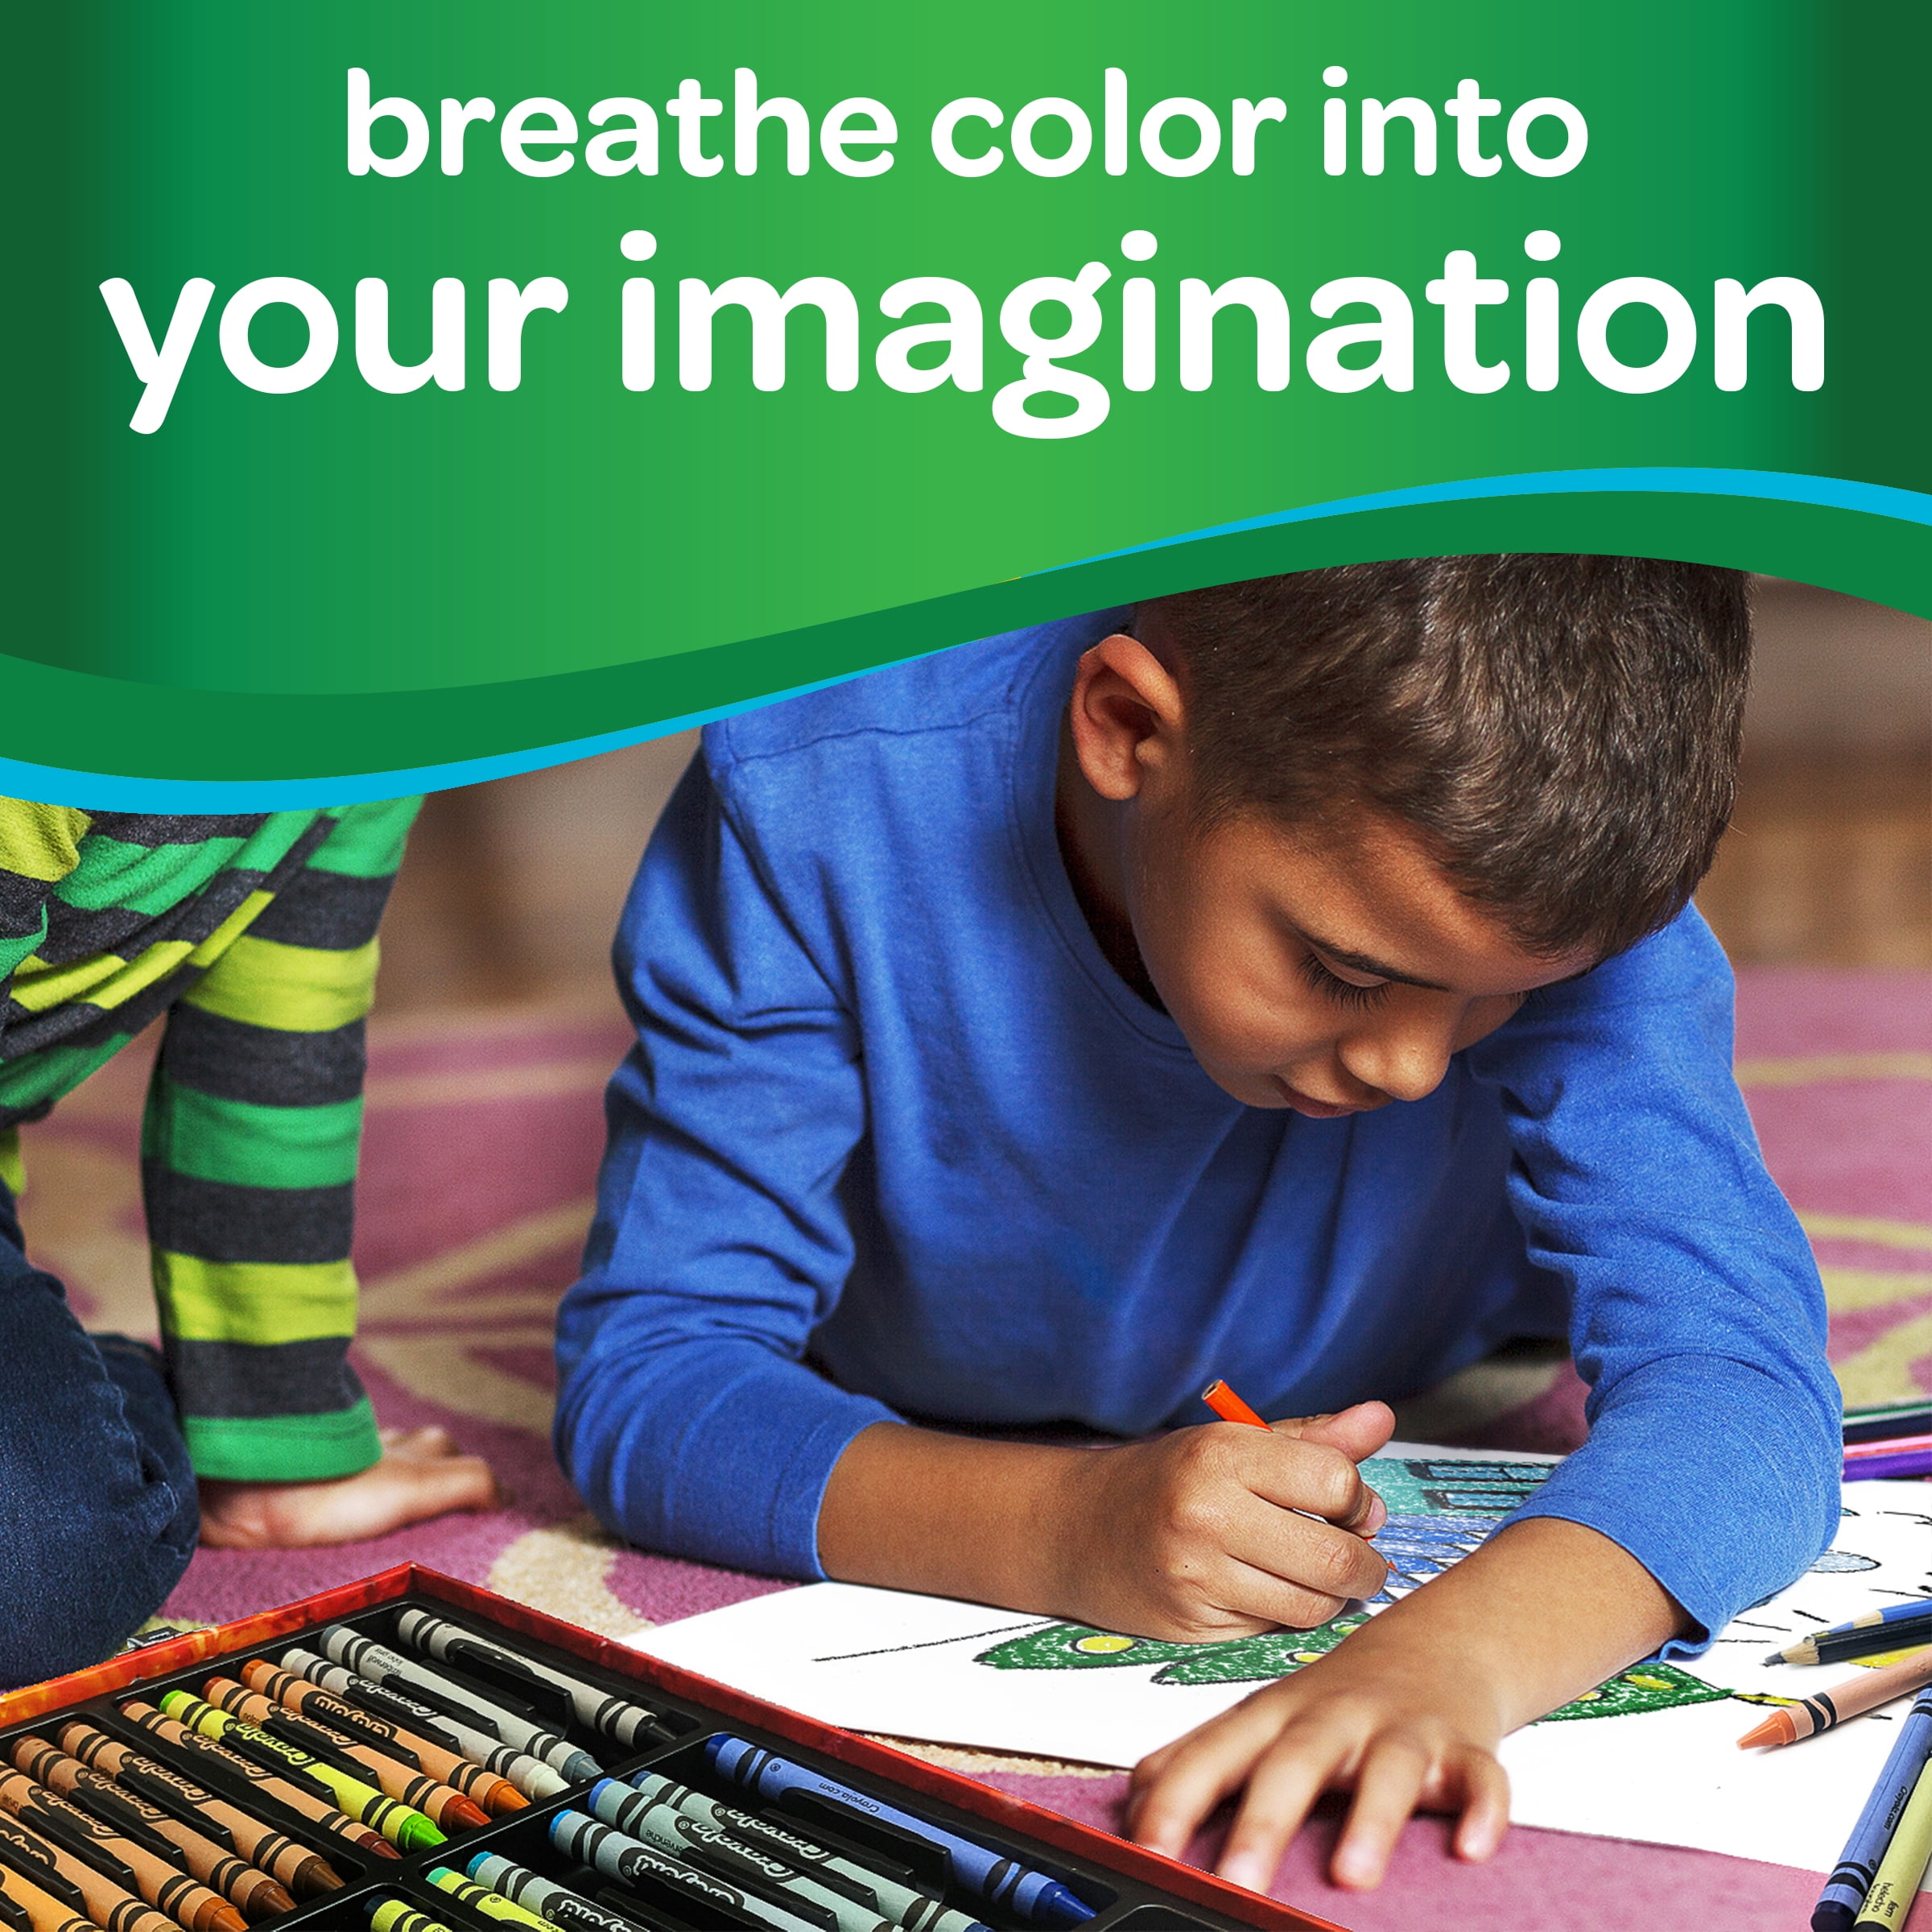 CRAYOLA Inspiration Art Case: 140 Pieces, Deluxe Set with Crayons